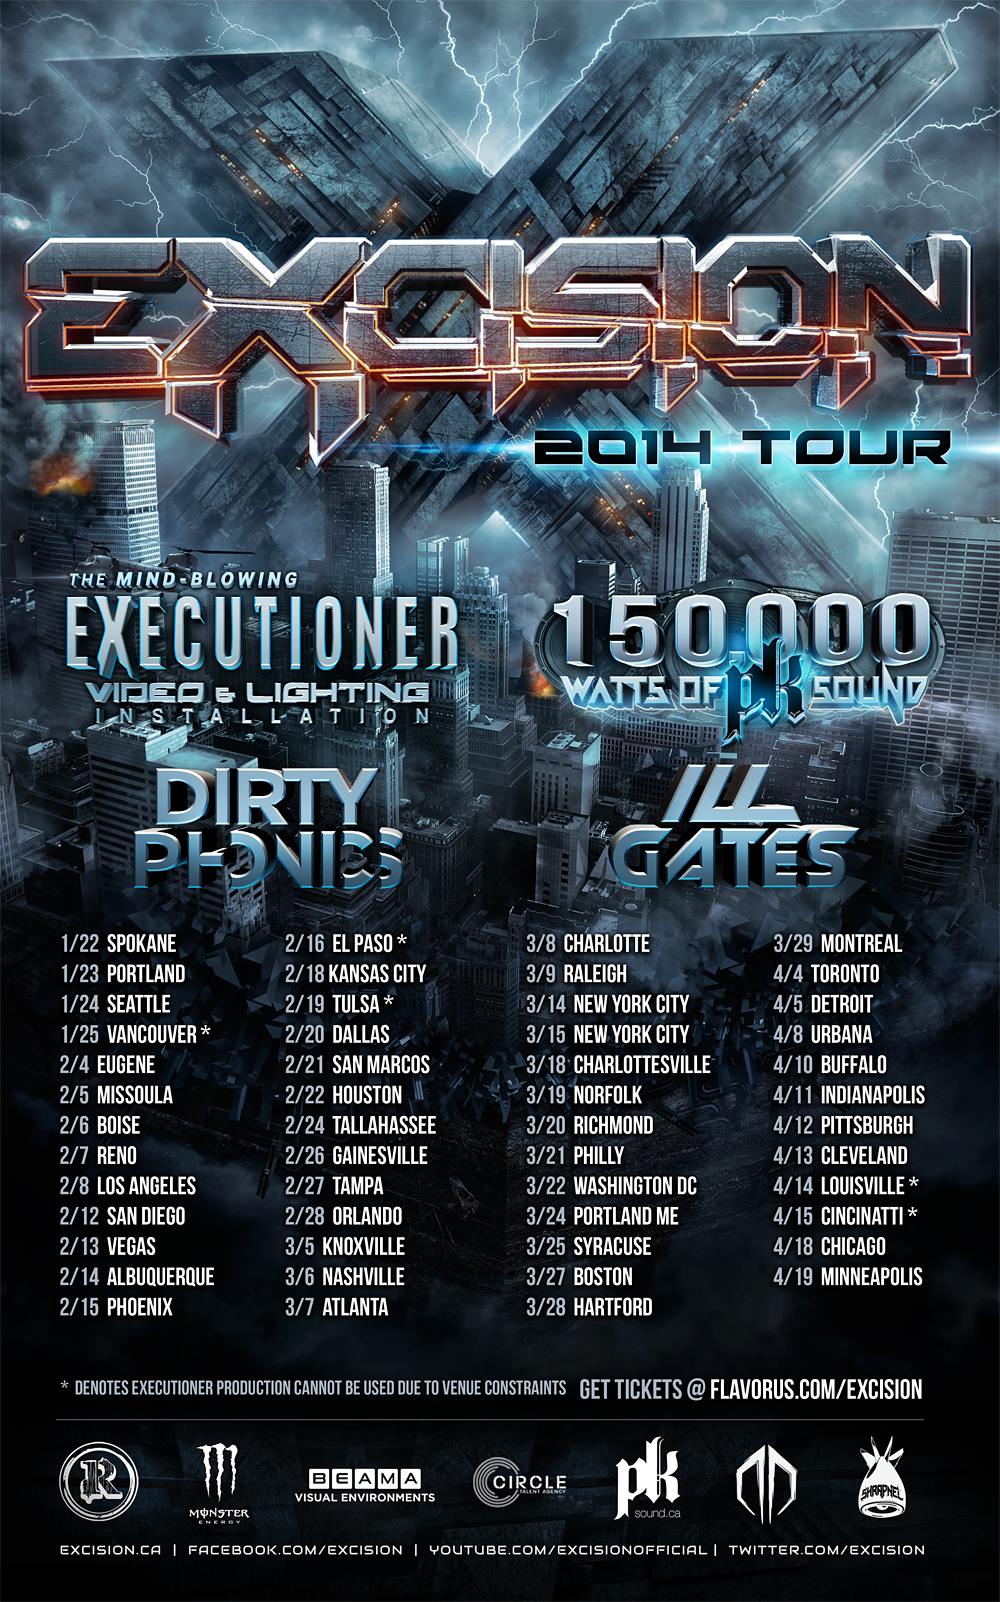 Excision 2014 Tour With Dirtyphonics, Ill Gates & The Return Of The Executioner!